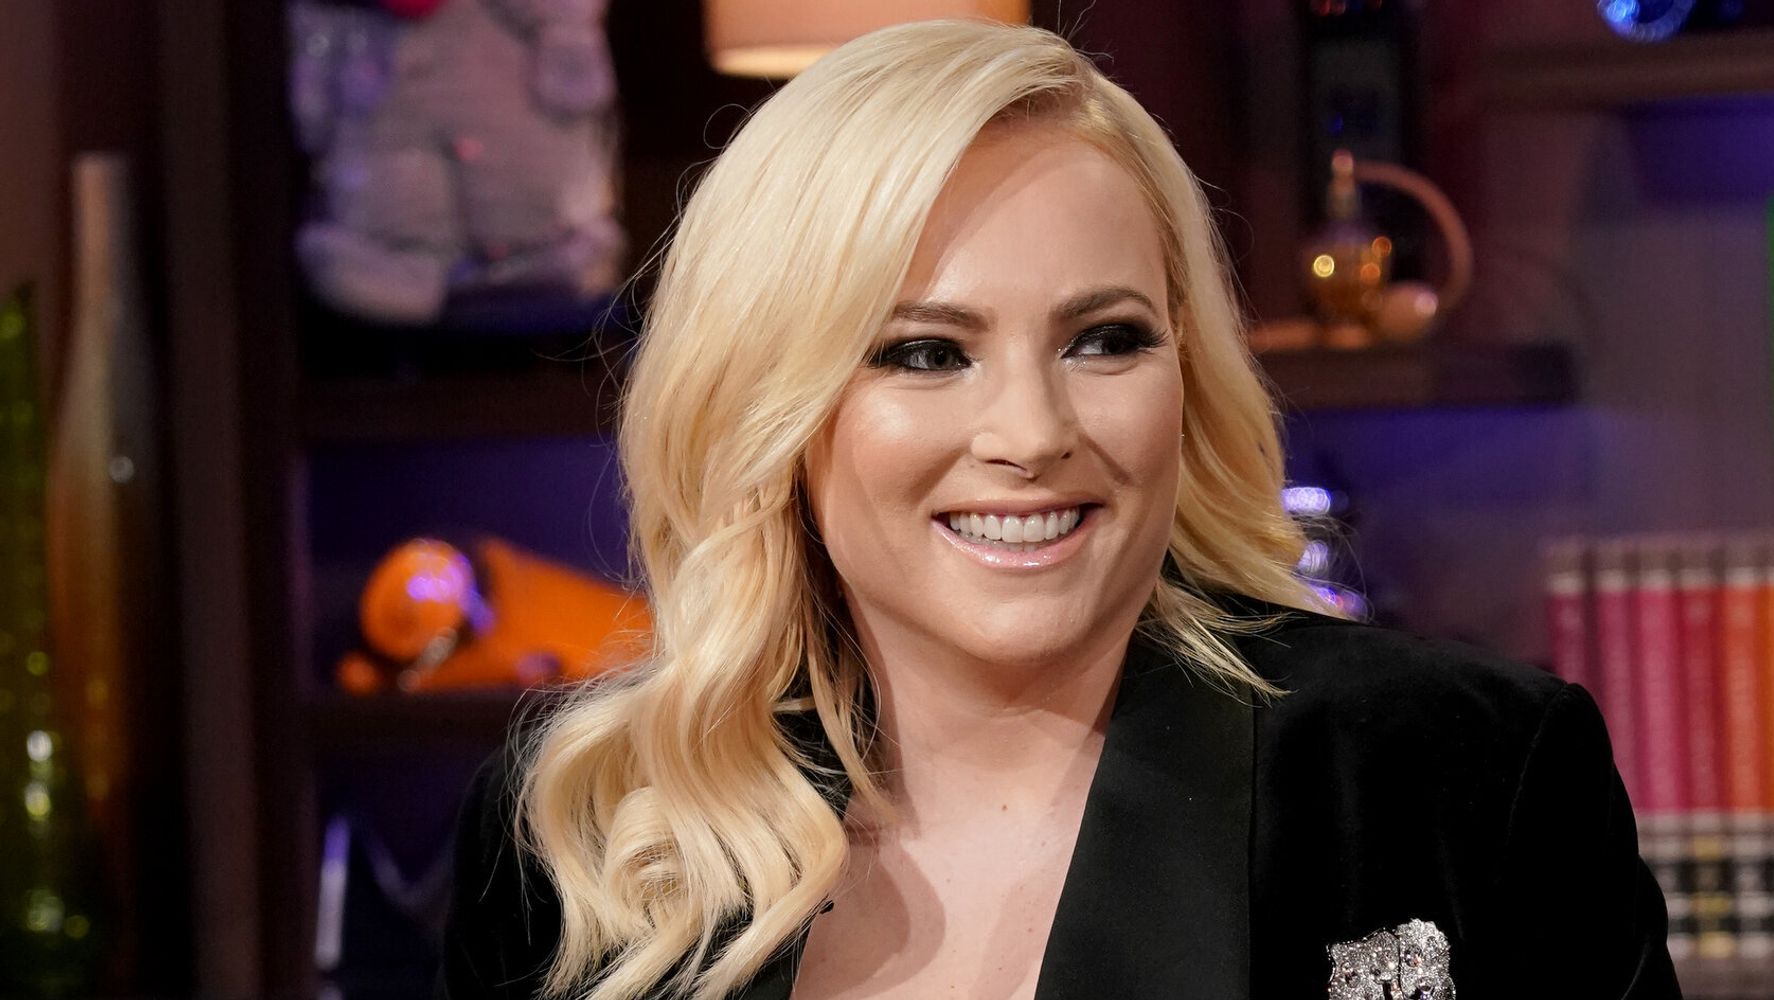 Meghan McCain Says Goodbye To 'The View': 'This Has Been A Really Wild Ride'